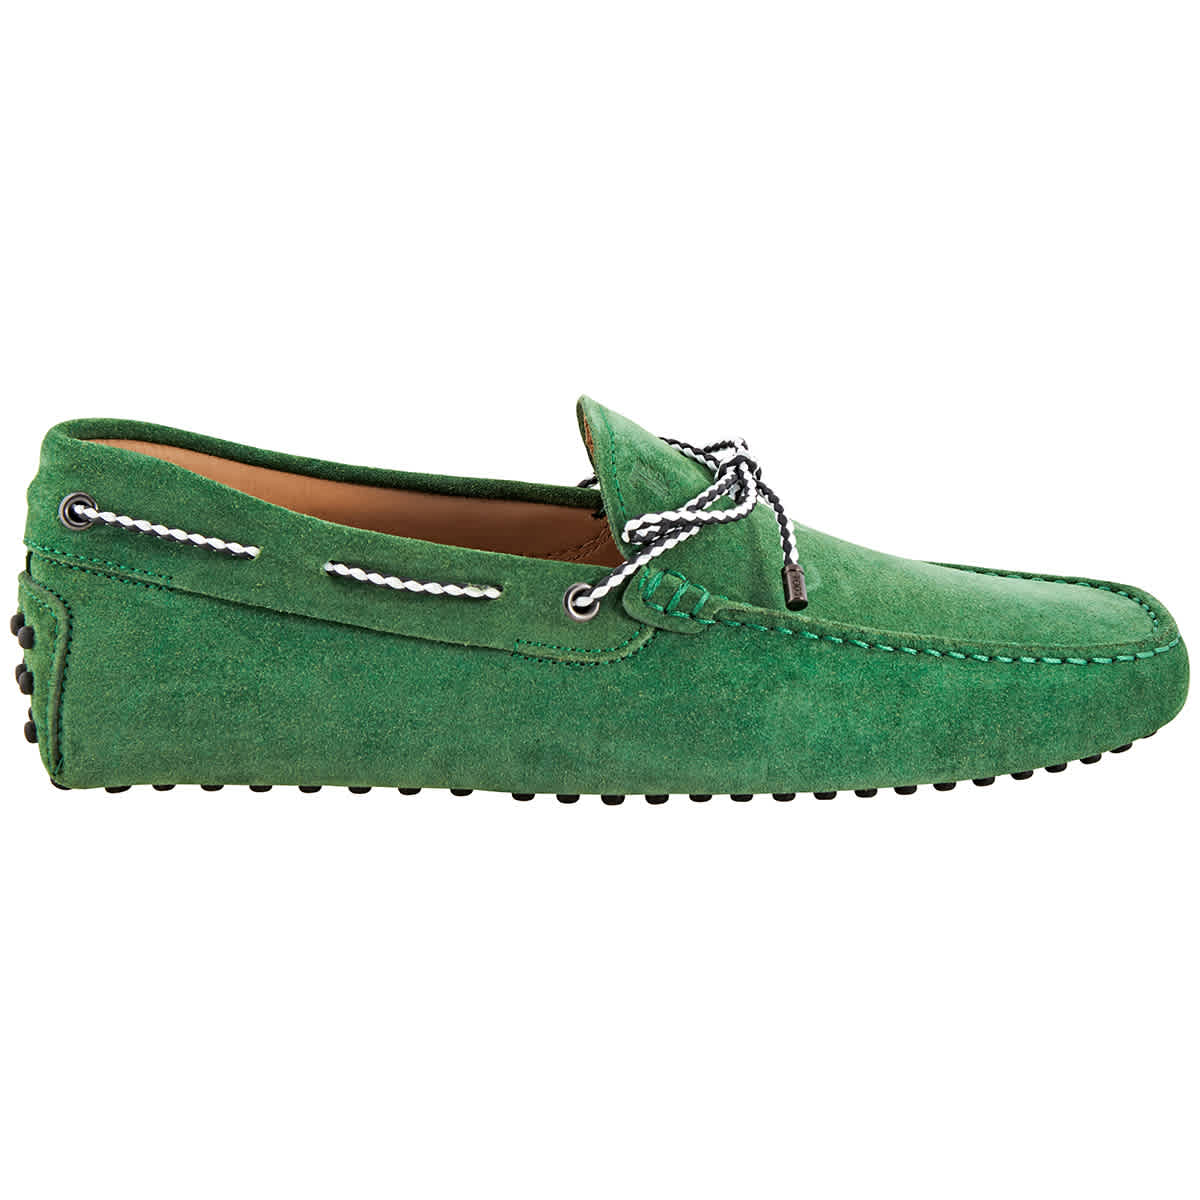 green driving shoes